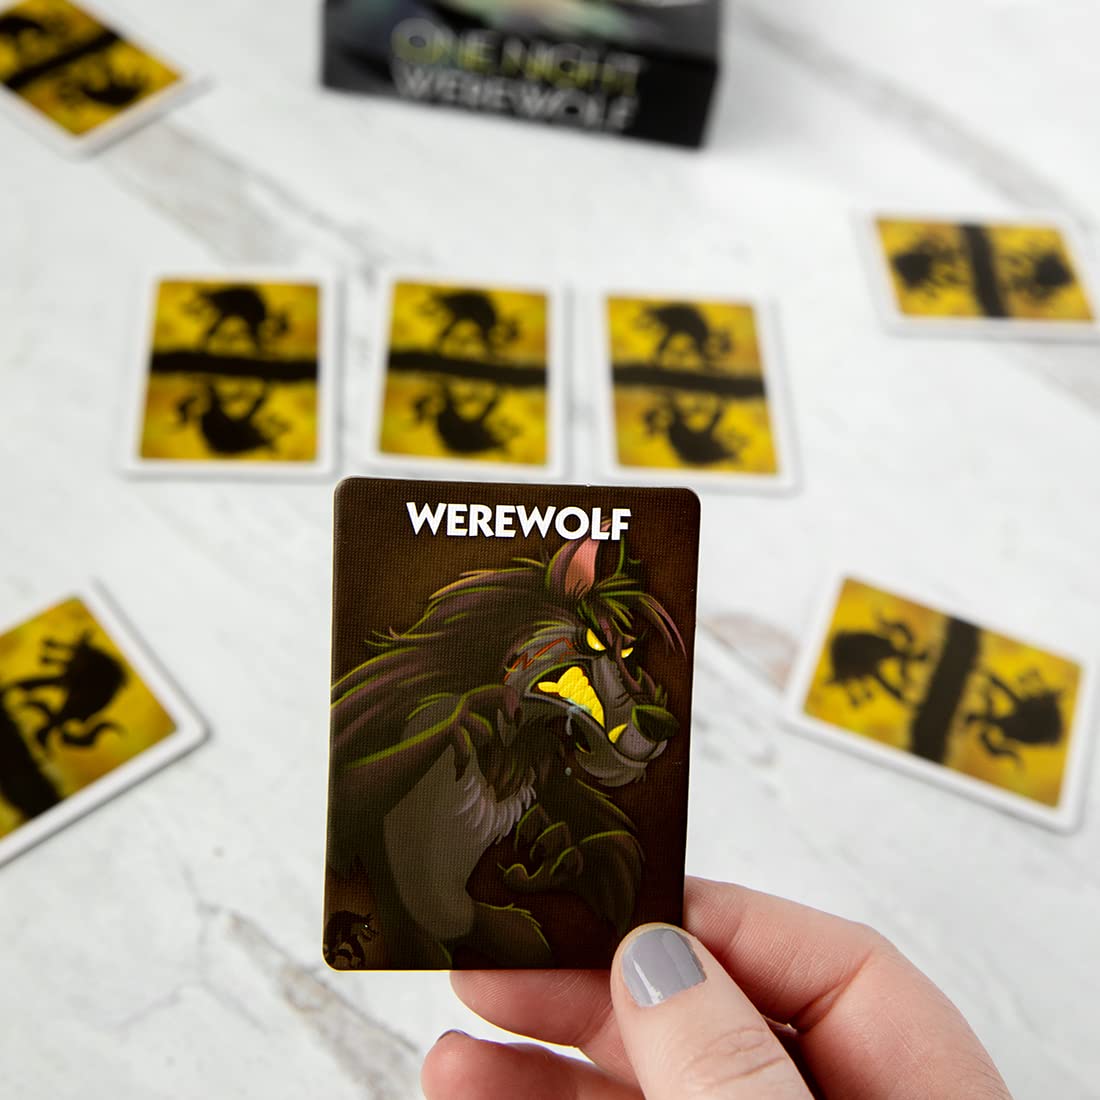 One Night Ultimate Werewolf by Bezier Games, Strategy Board Game